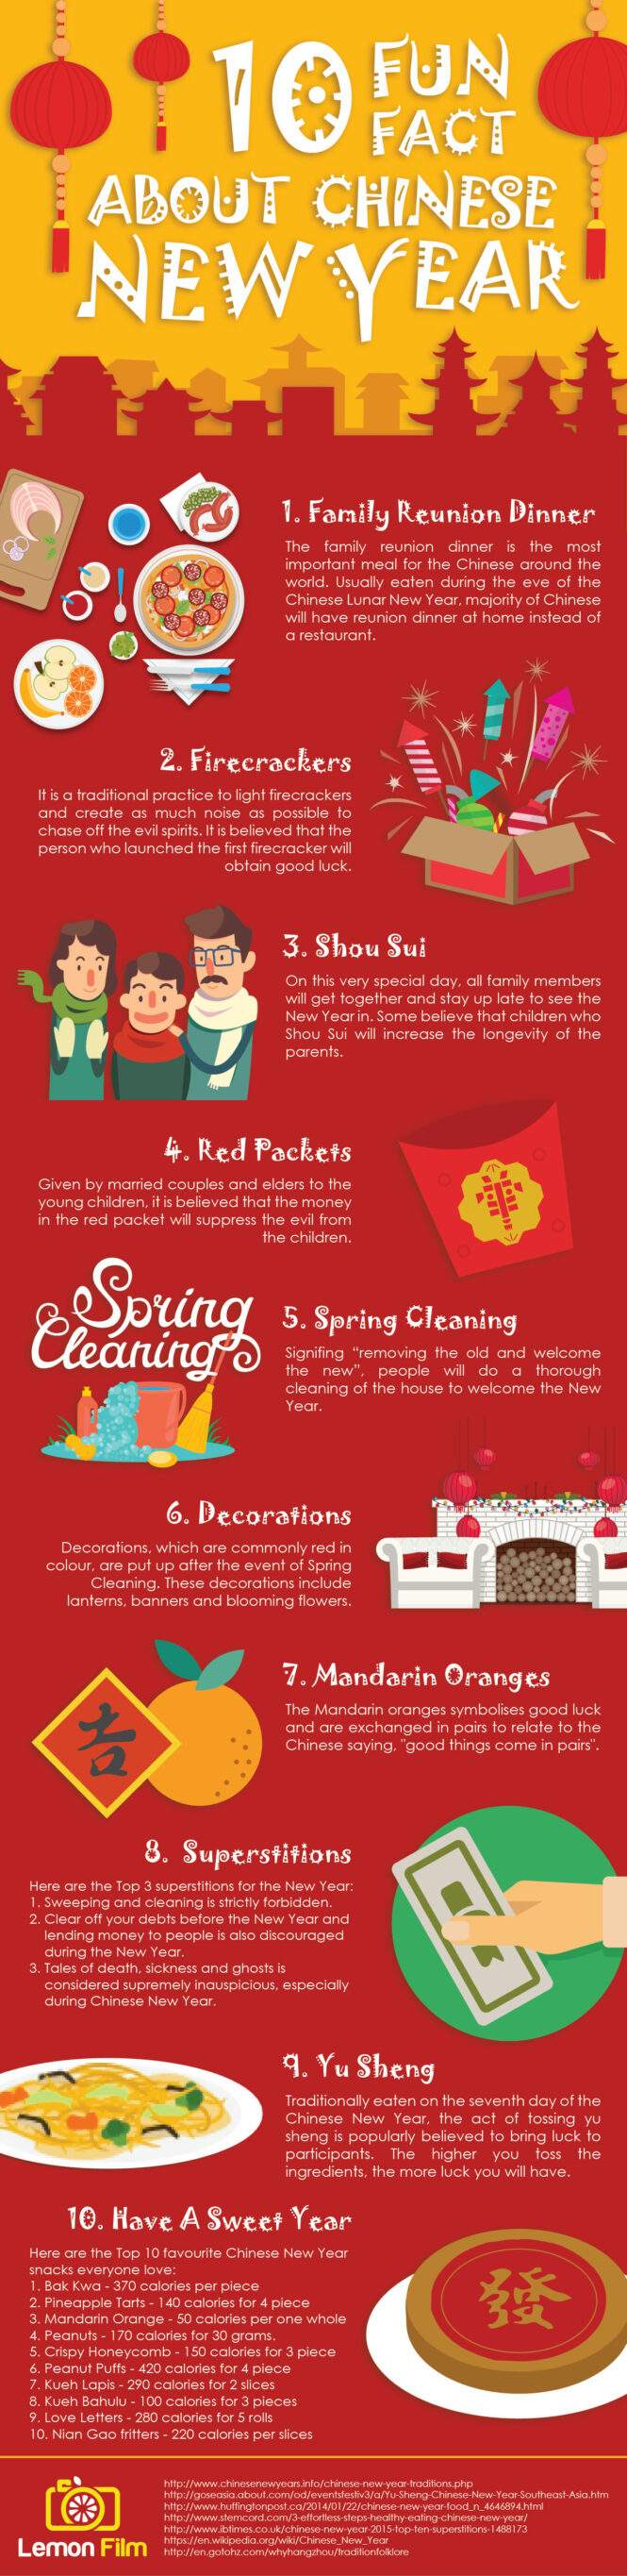 Chinese New Year Basic Facts